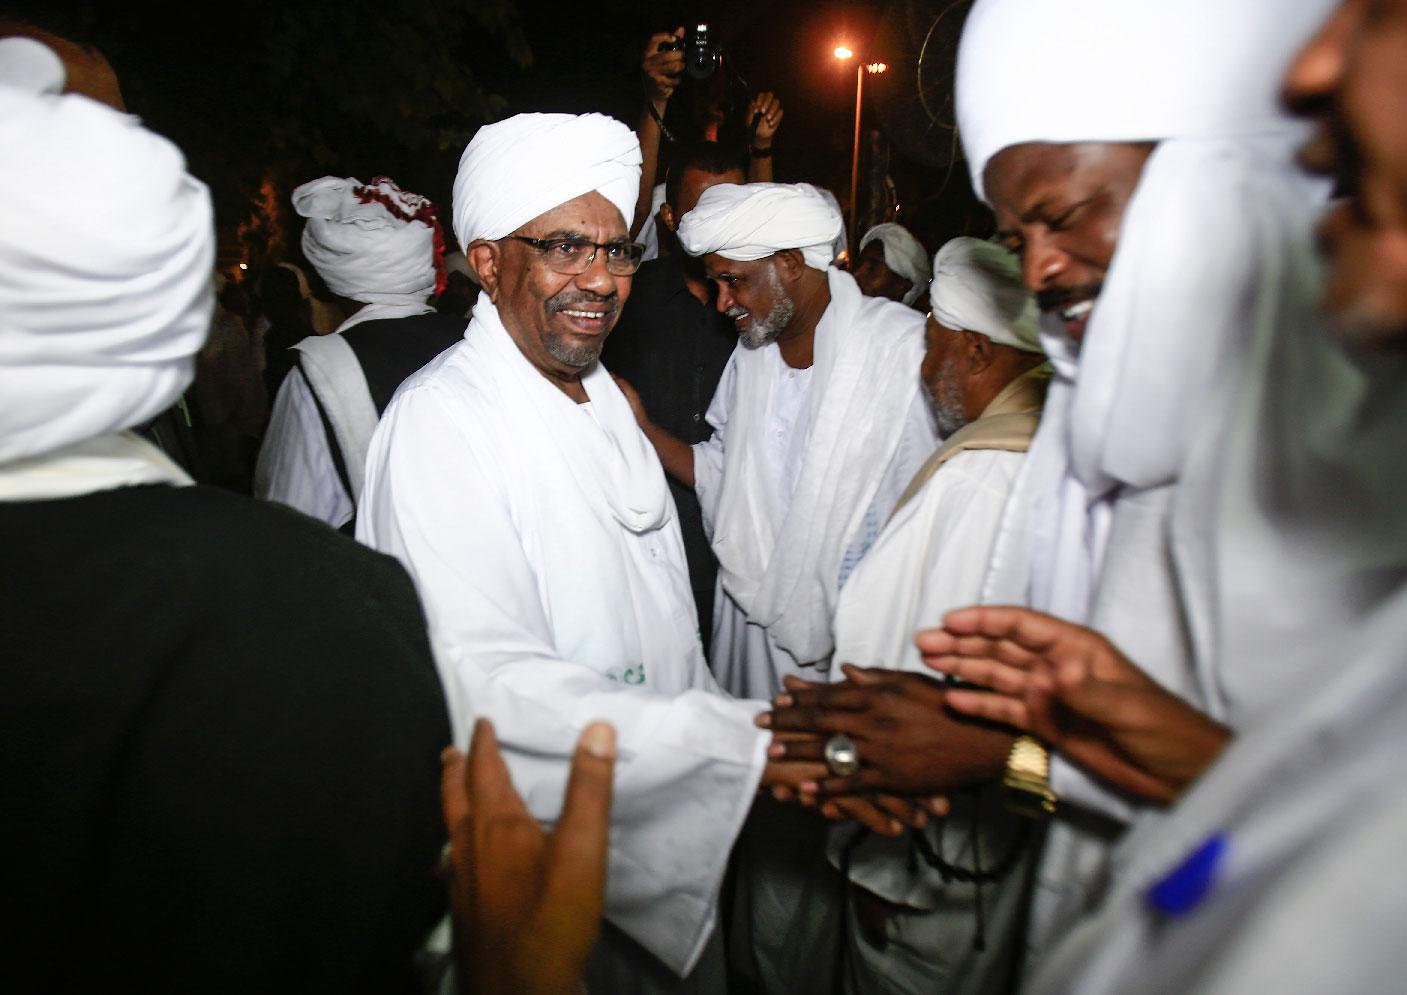 Sudanese President Omar al-Bashir shakes hands with Sufi Muslim clerics at the presidential palace in the capital Khartoum on January 3, 2019.